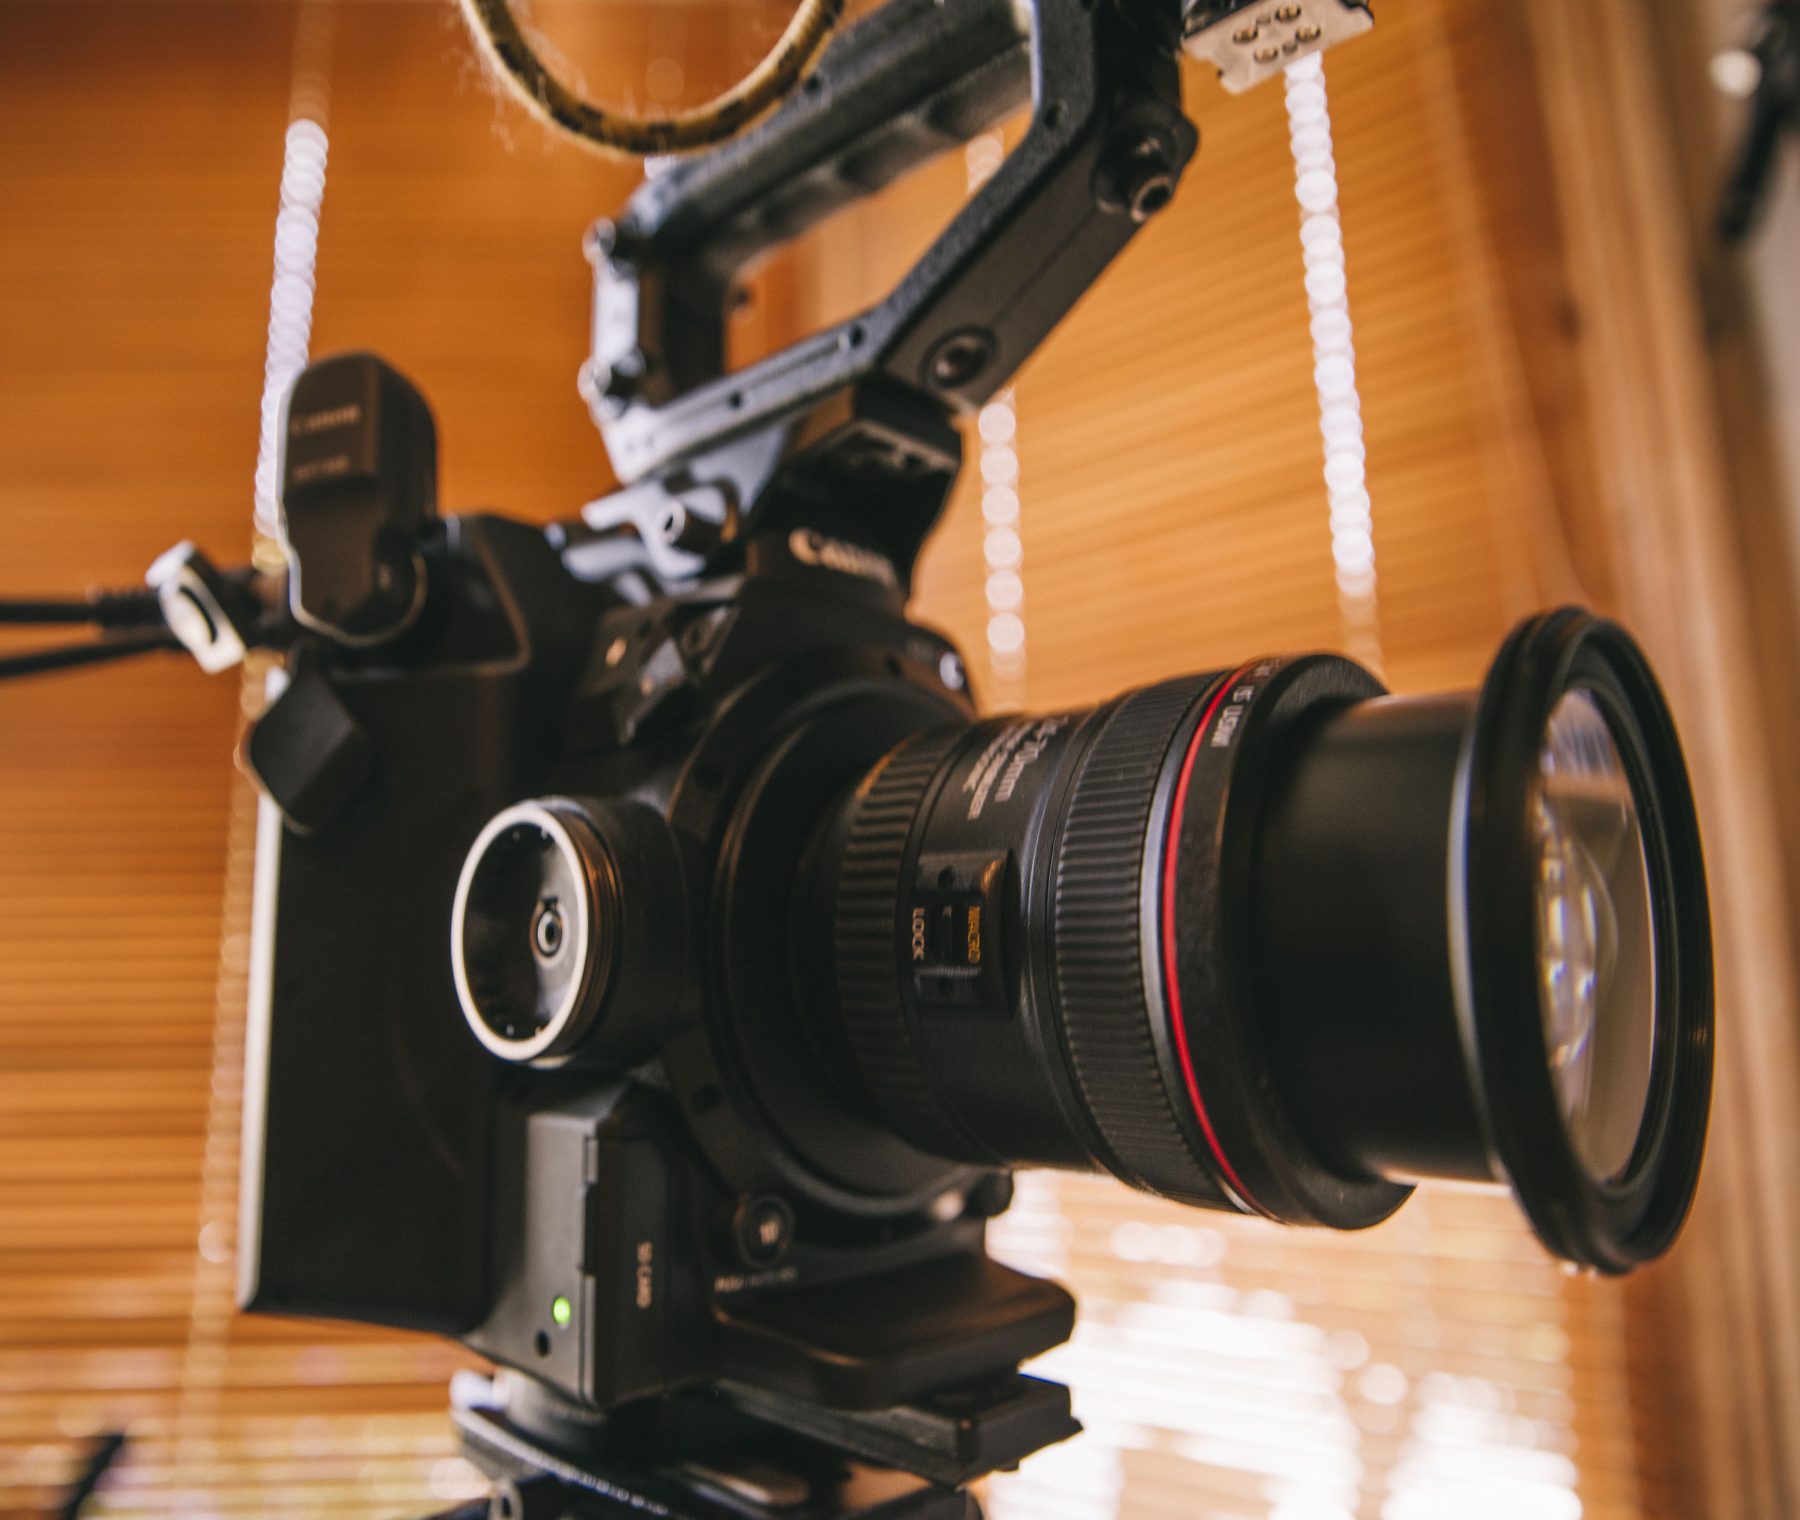 Initial thoughts/ hands on with the Canon C300 Mark 2 